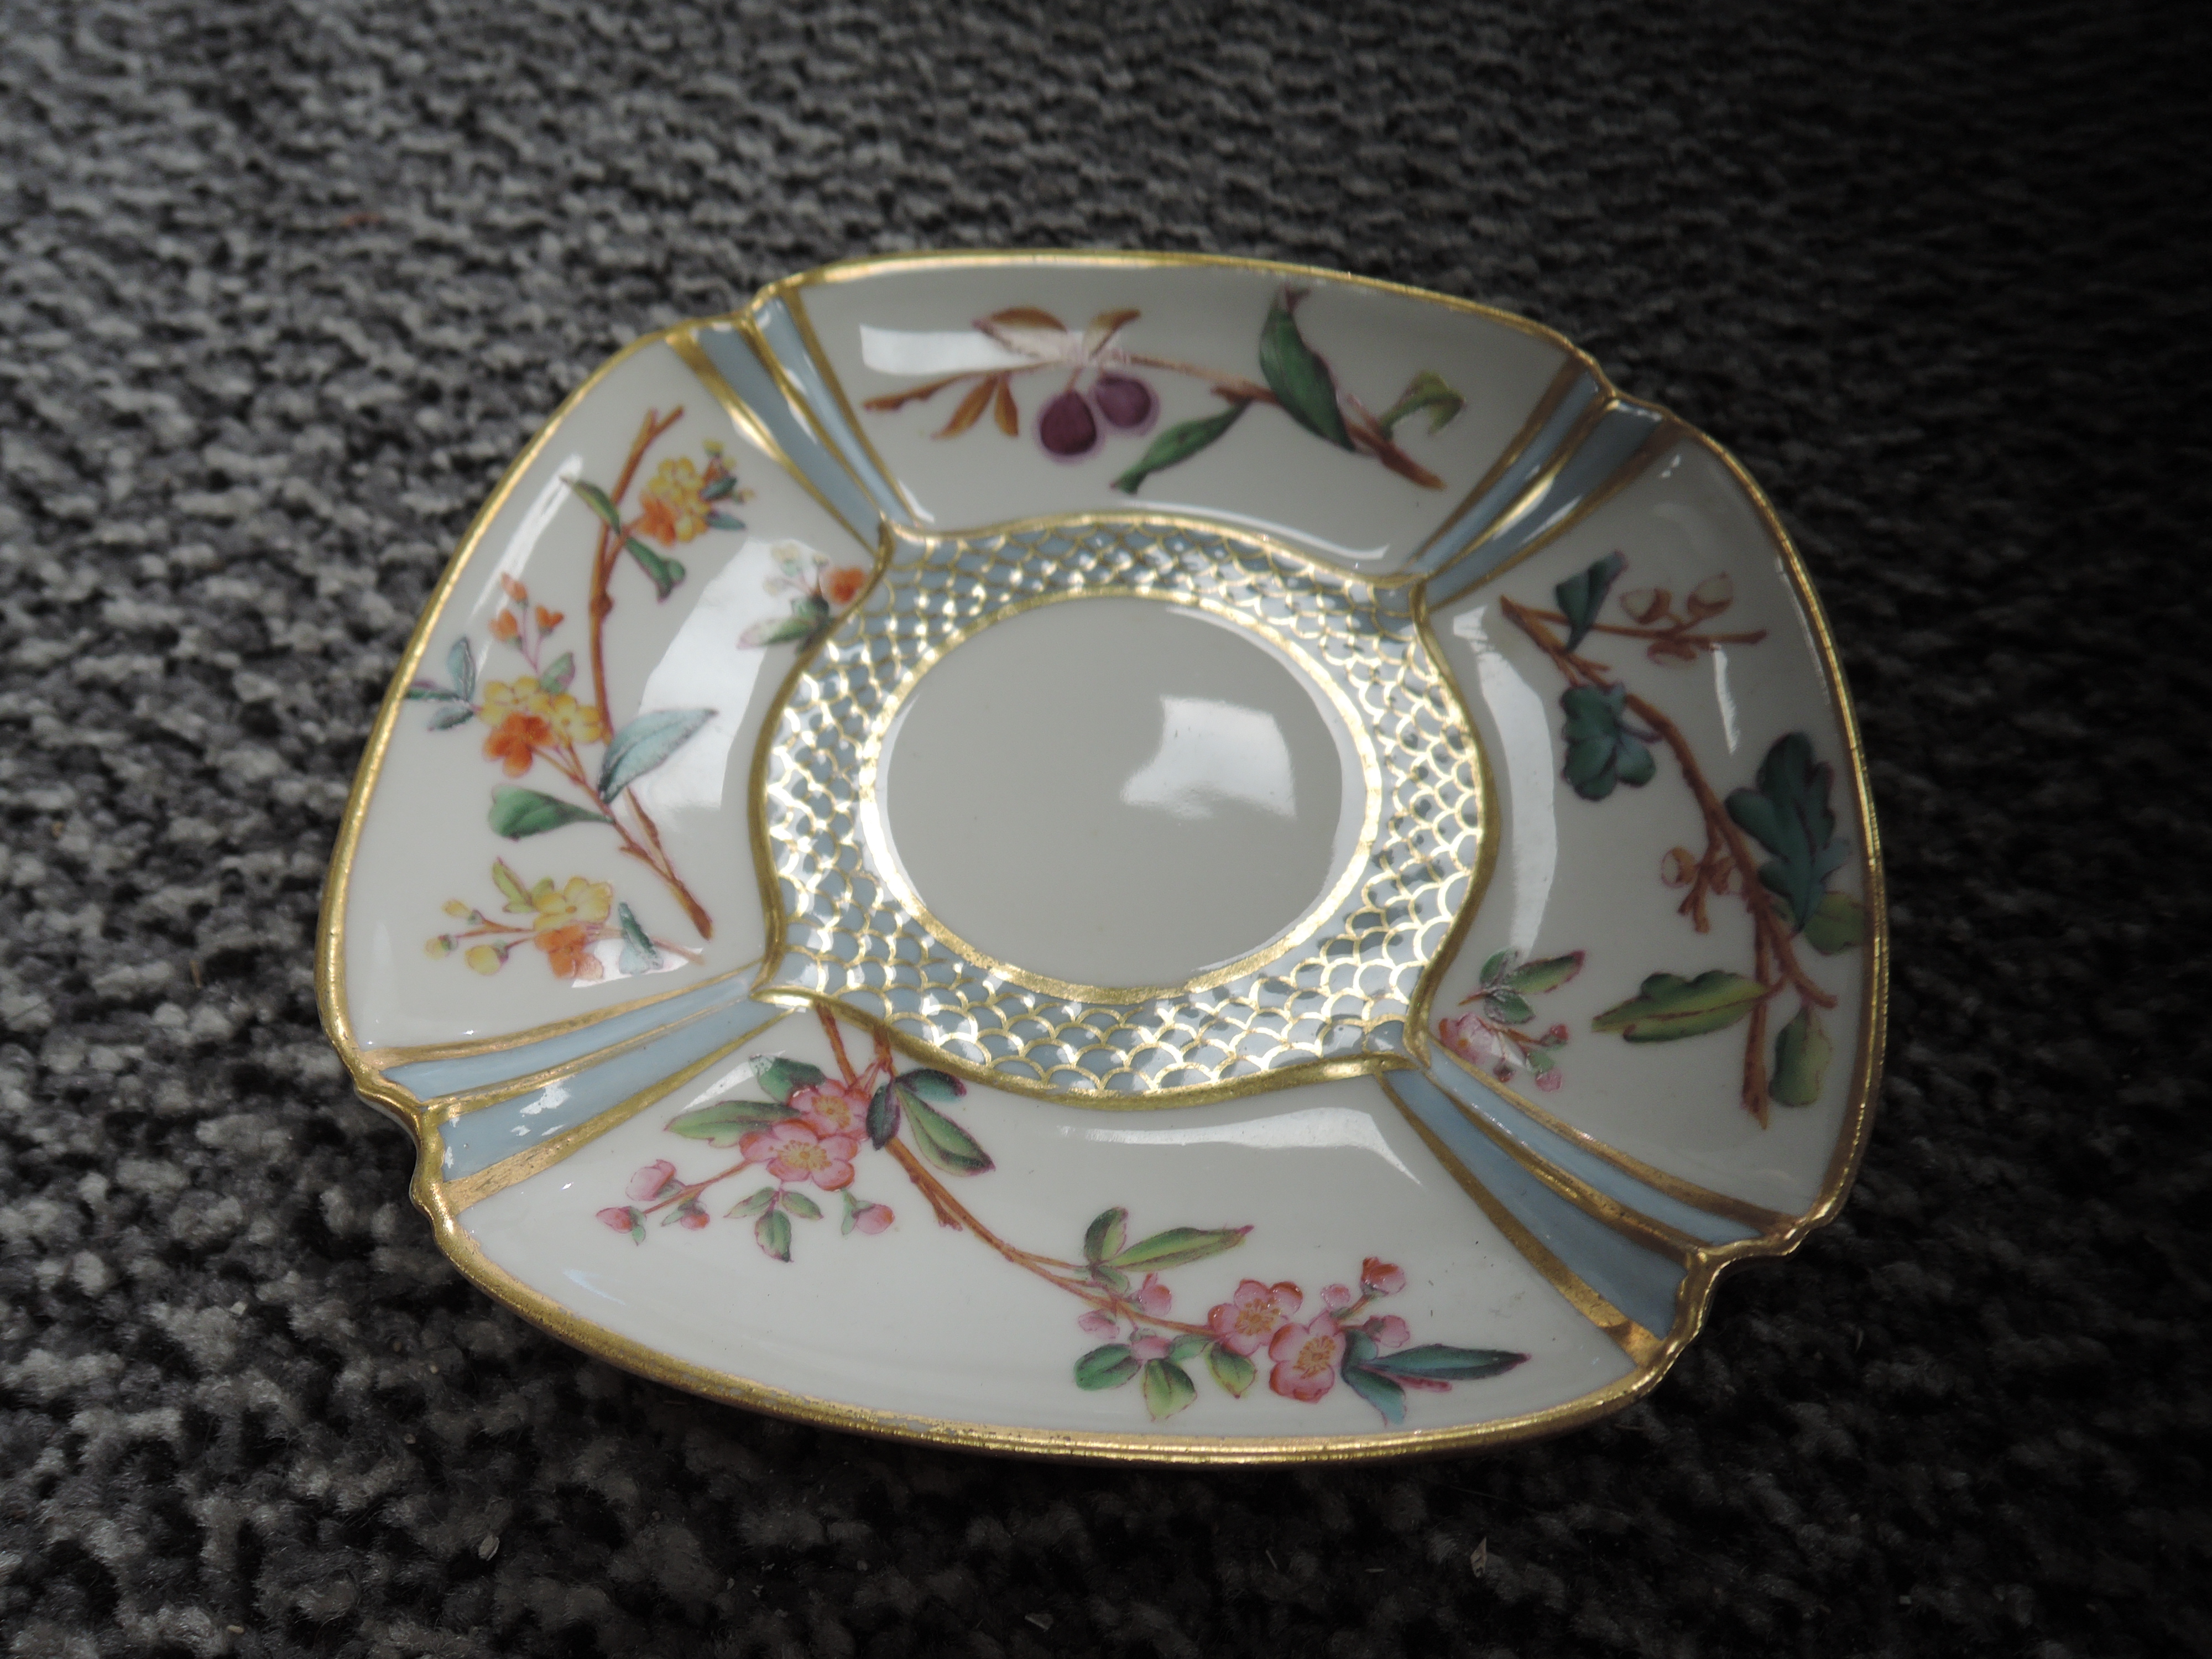 An exquisite tea cup and saucer set by Spode Copeland Pt no 3112 both pieces very good - Image 2 of 7